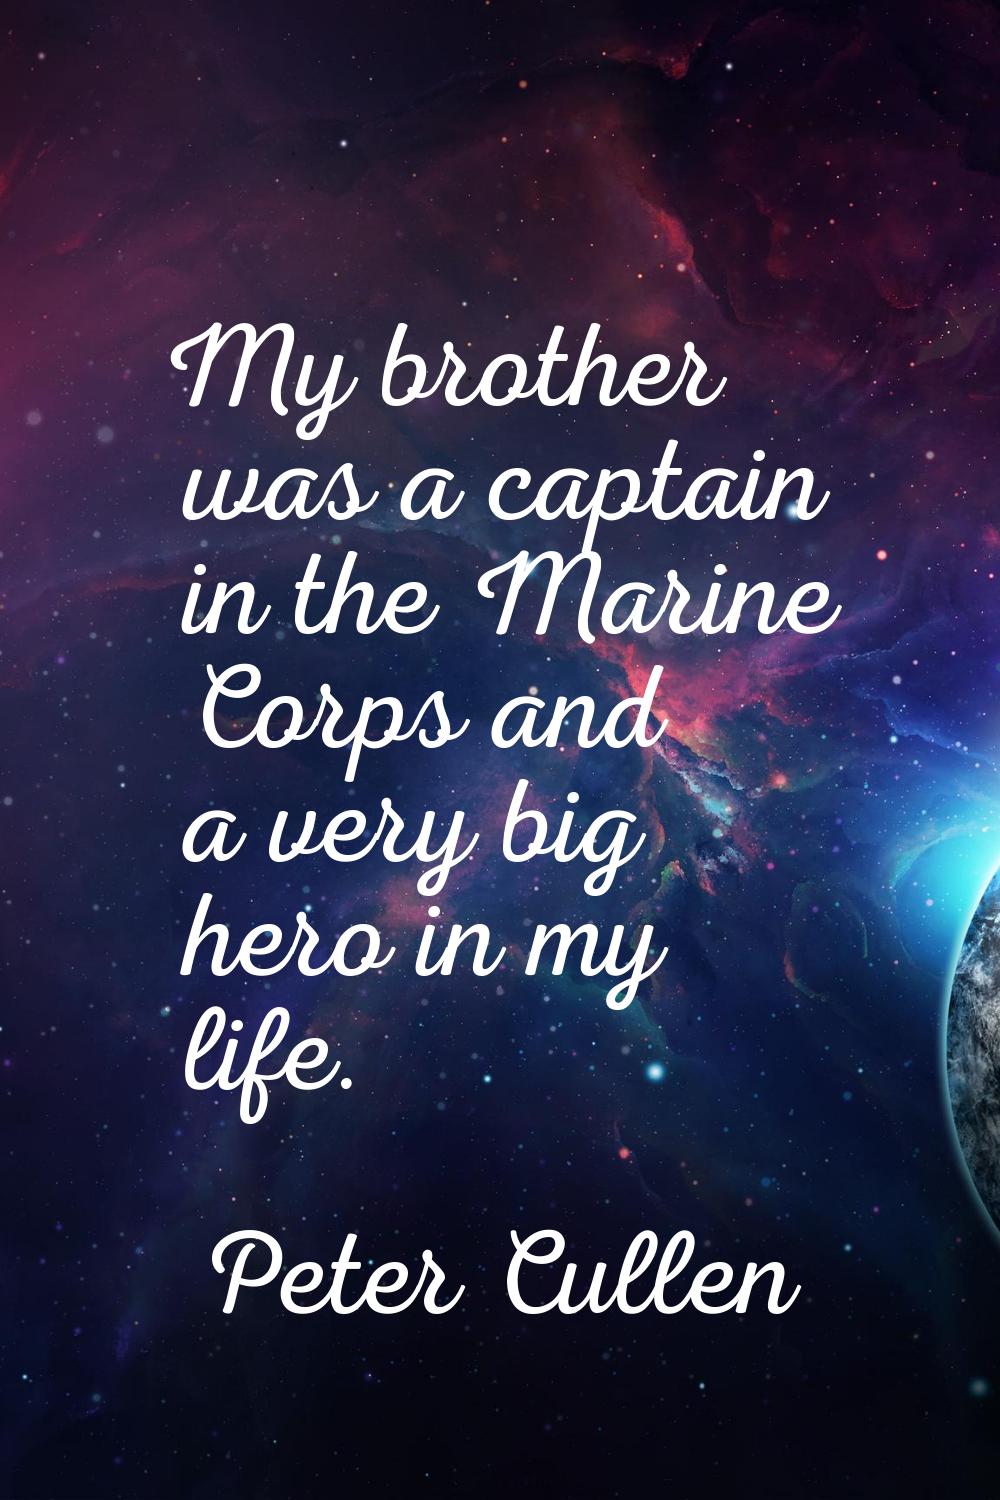 My brother was a captain in the Marine Corps and a very big hero in my life.